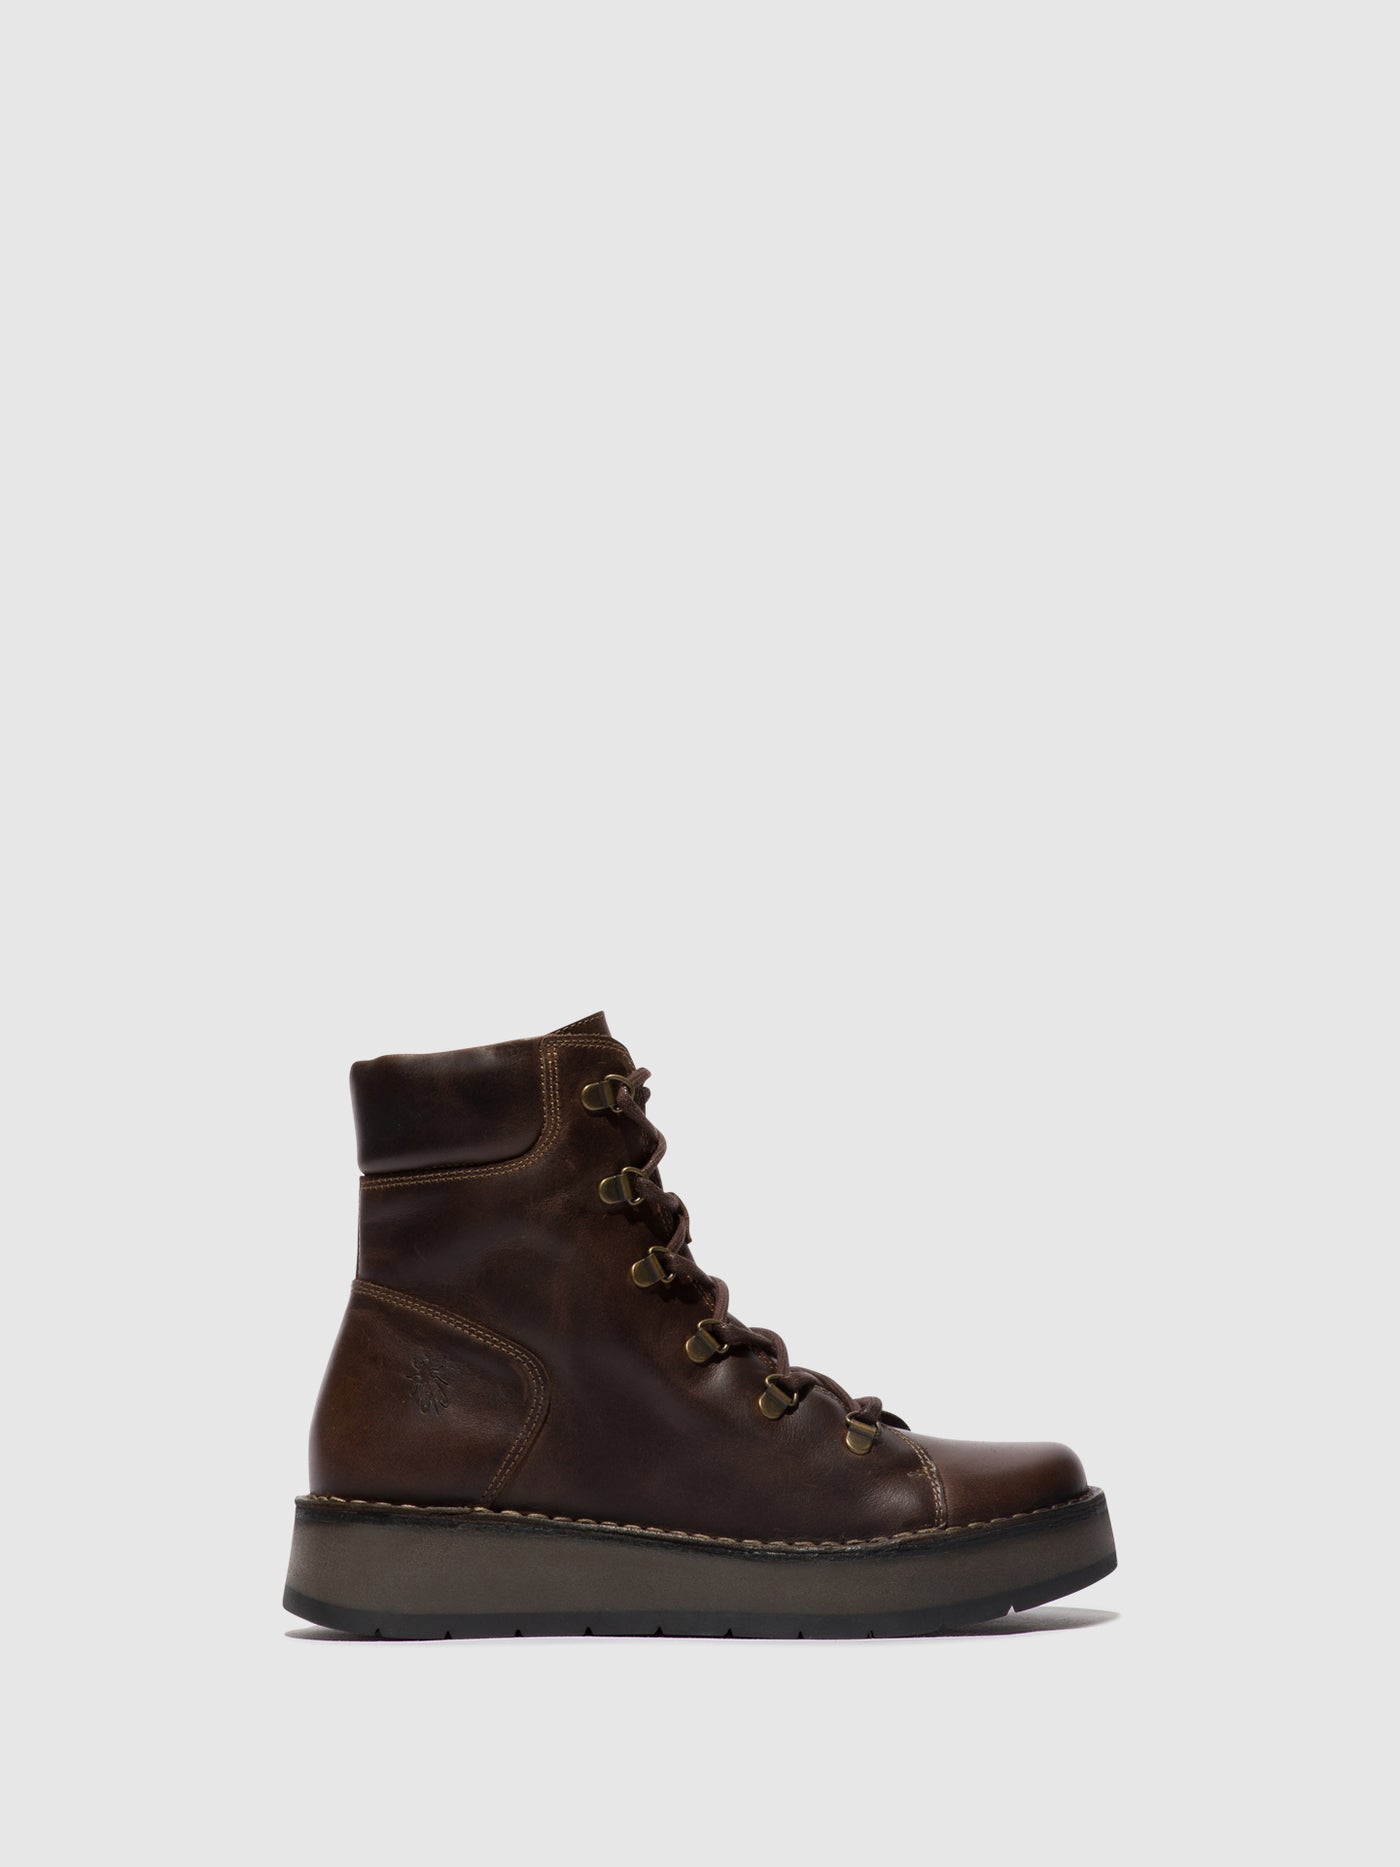 Lace-up Ankle Boots ROXY094FLY DK. BROWN